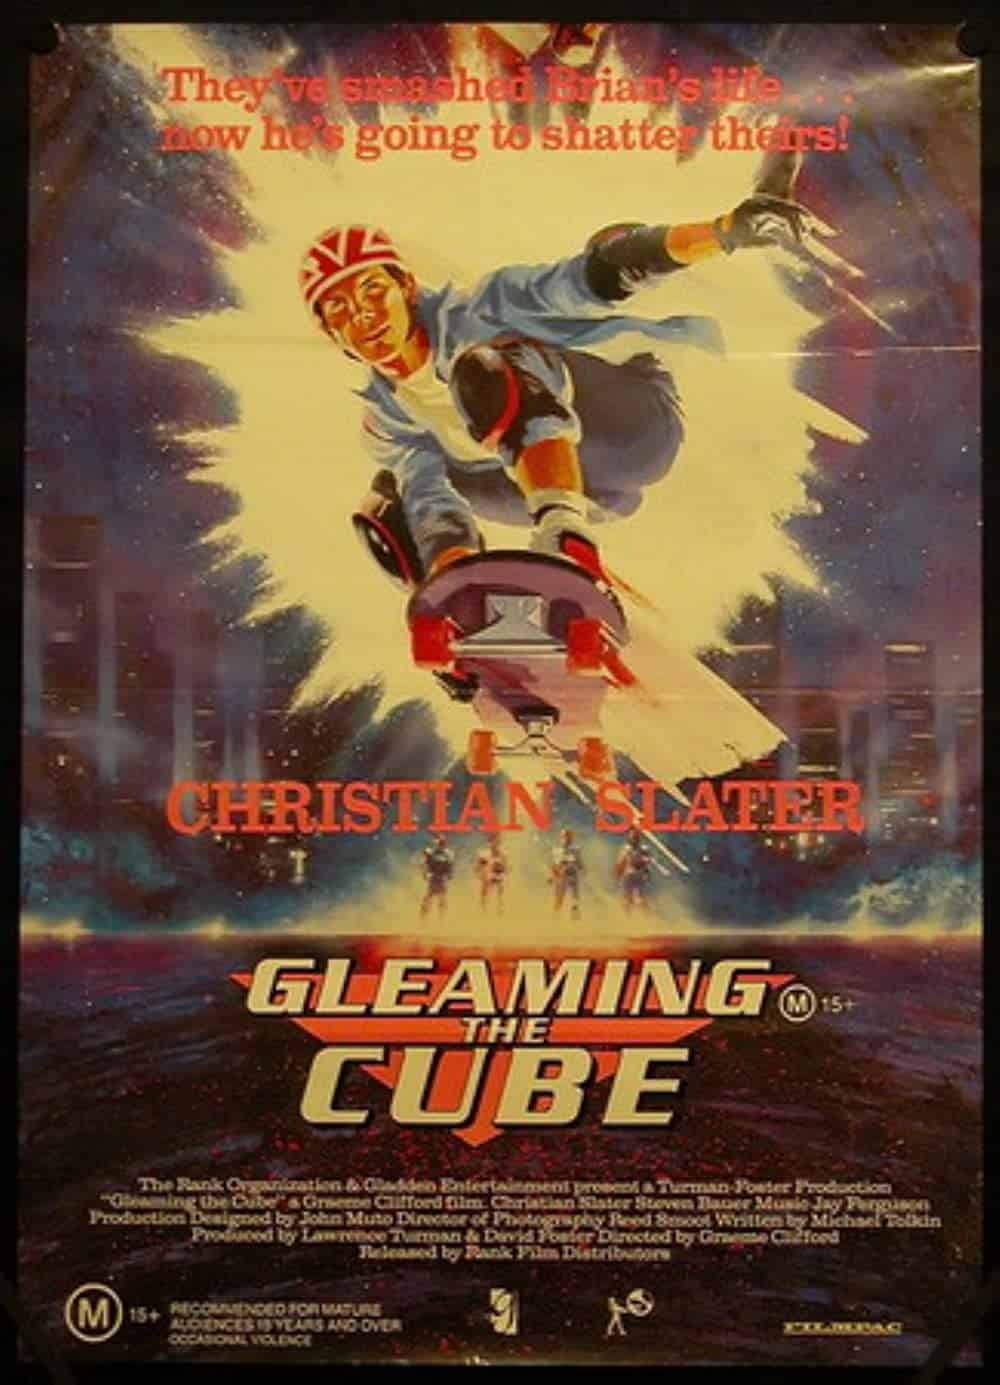 20 Best Skate Films to See This Weekend Gleaming the Cube (1989)